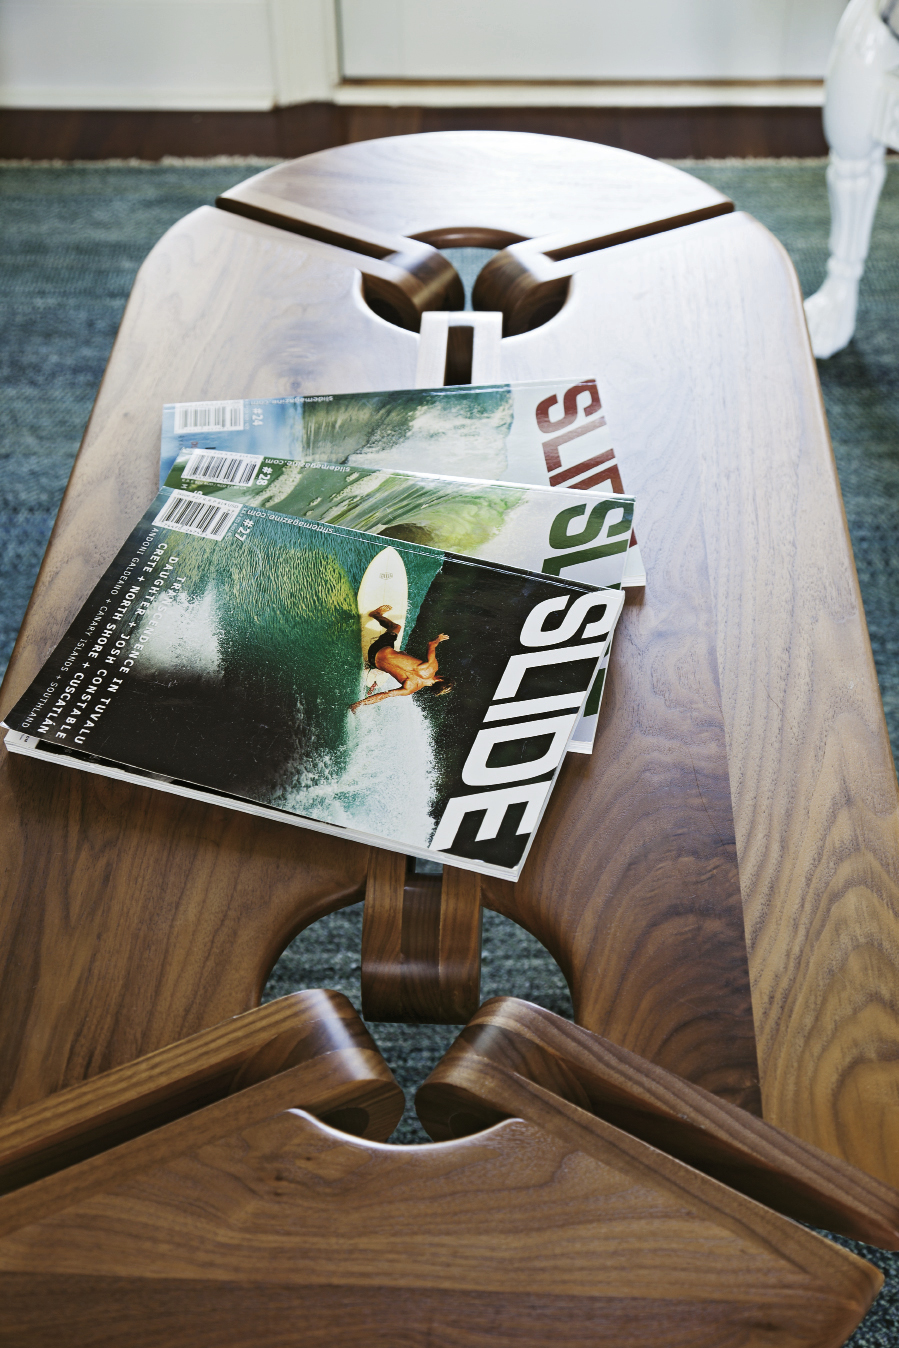 Surf magazines put a personal stamp on a mid-century-style coffee table by New Breed Furniture Network.